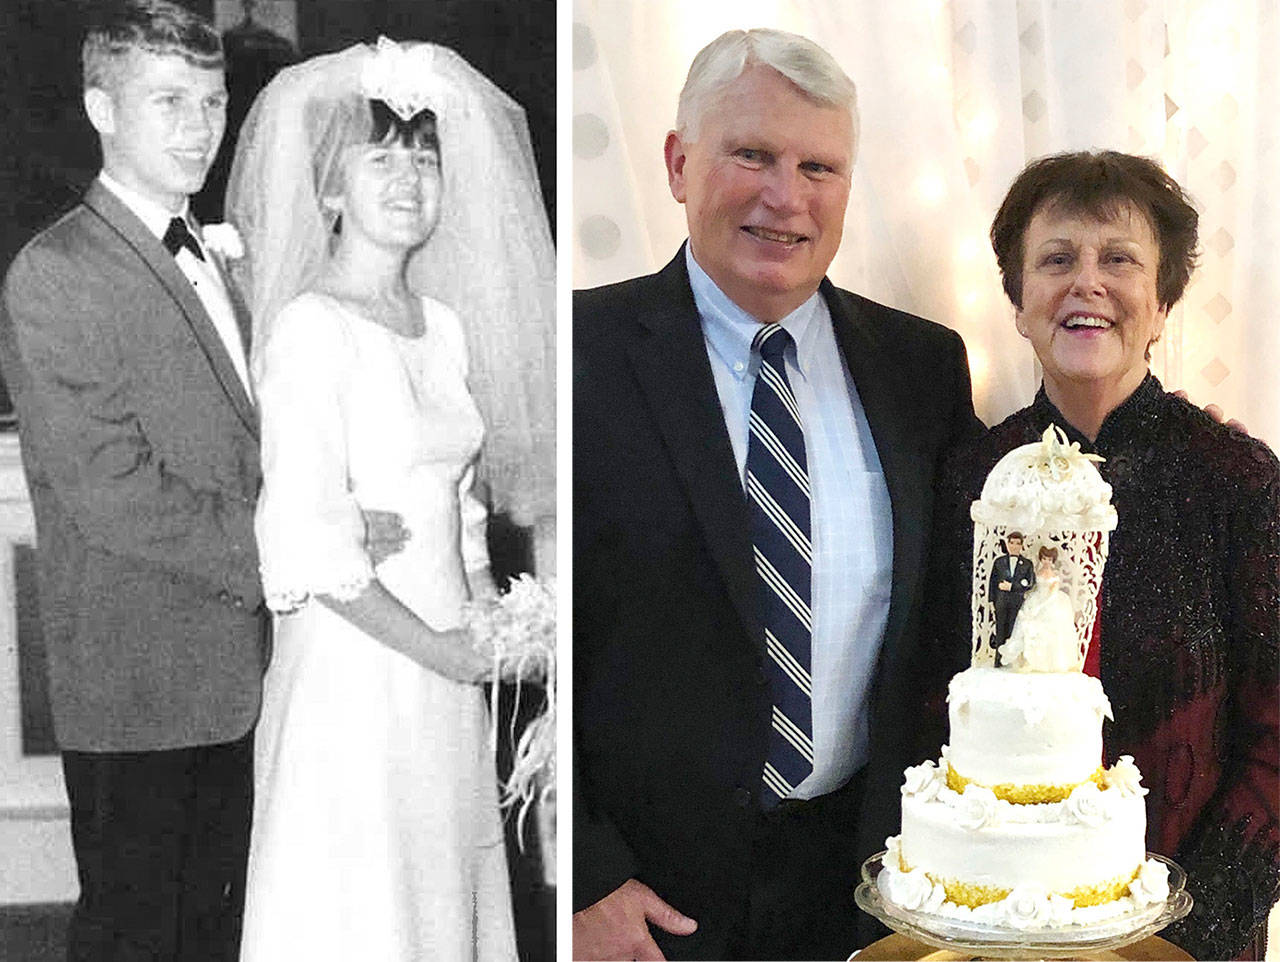 Greg and Barb Vesey were married at Sacred Heart Catholic Church in Enumclaw on Jan. 3, 1970. They celebrated their 50th anniversary at Bonney Lake’s Swiss Sportsmen’s Club last December. Contributed photos